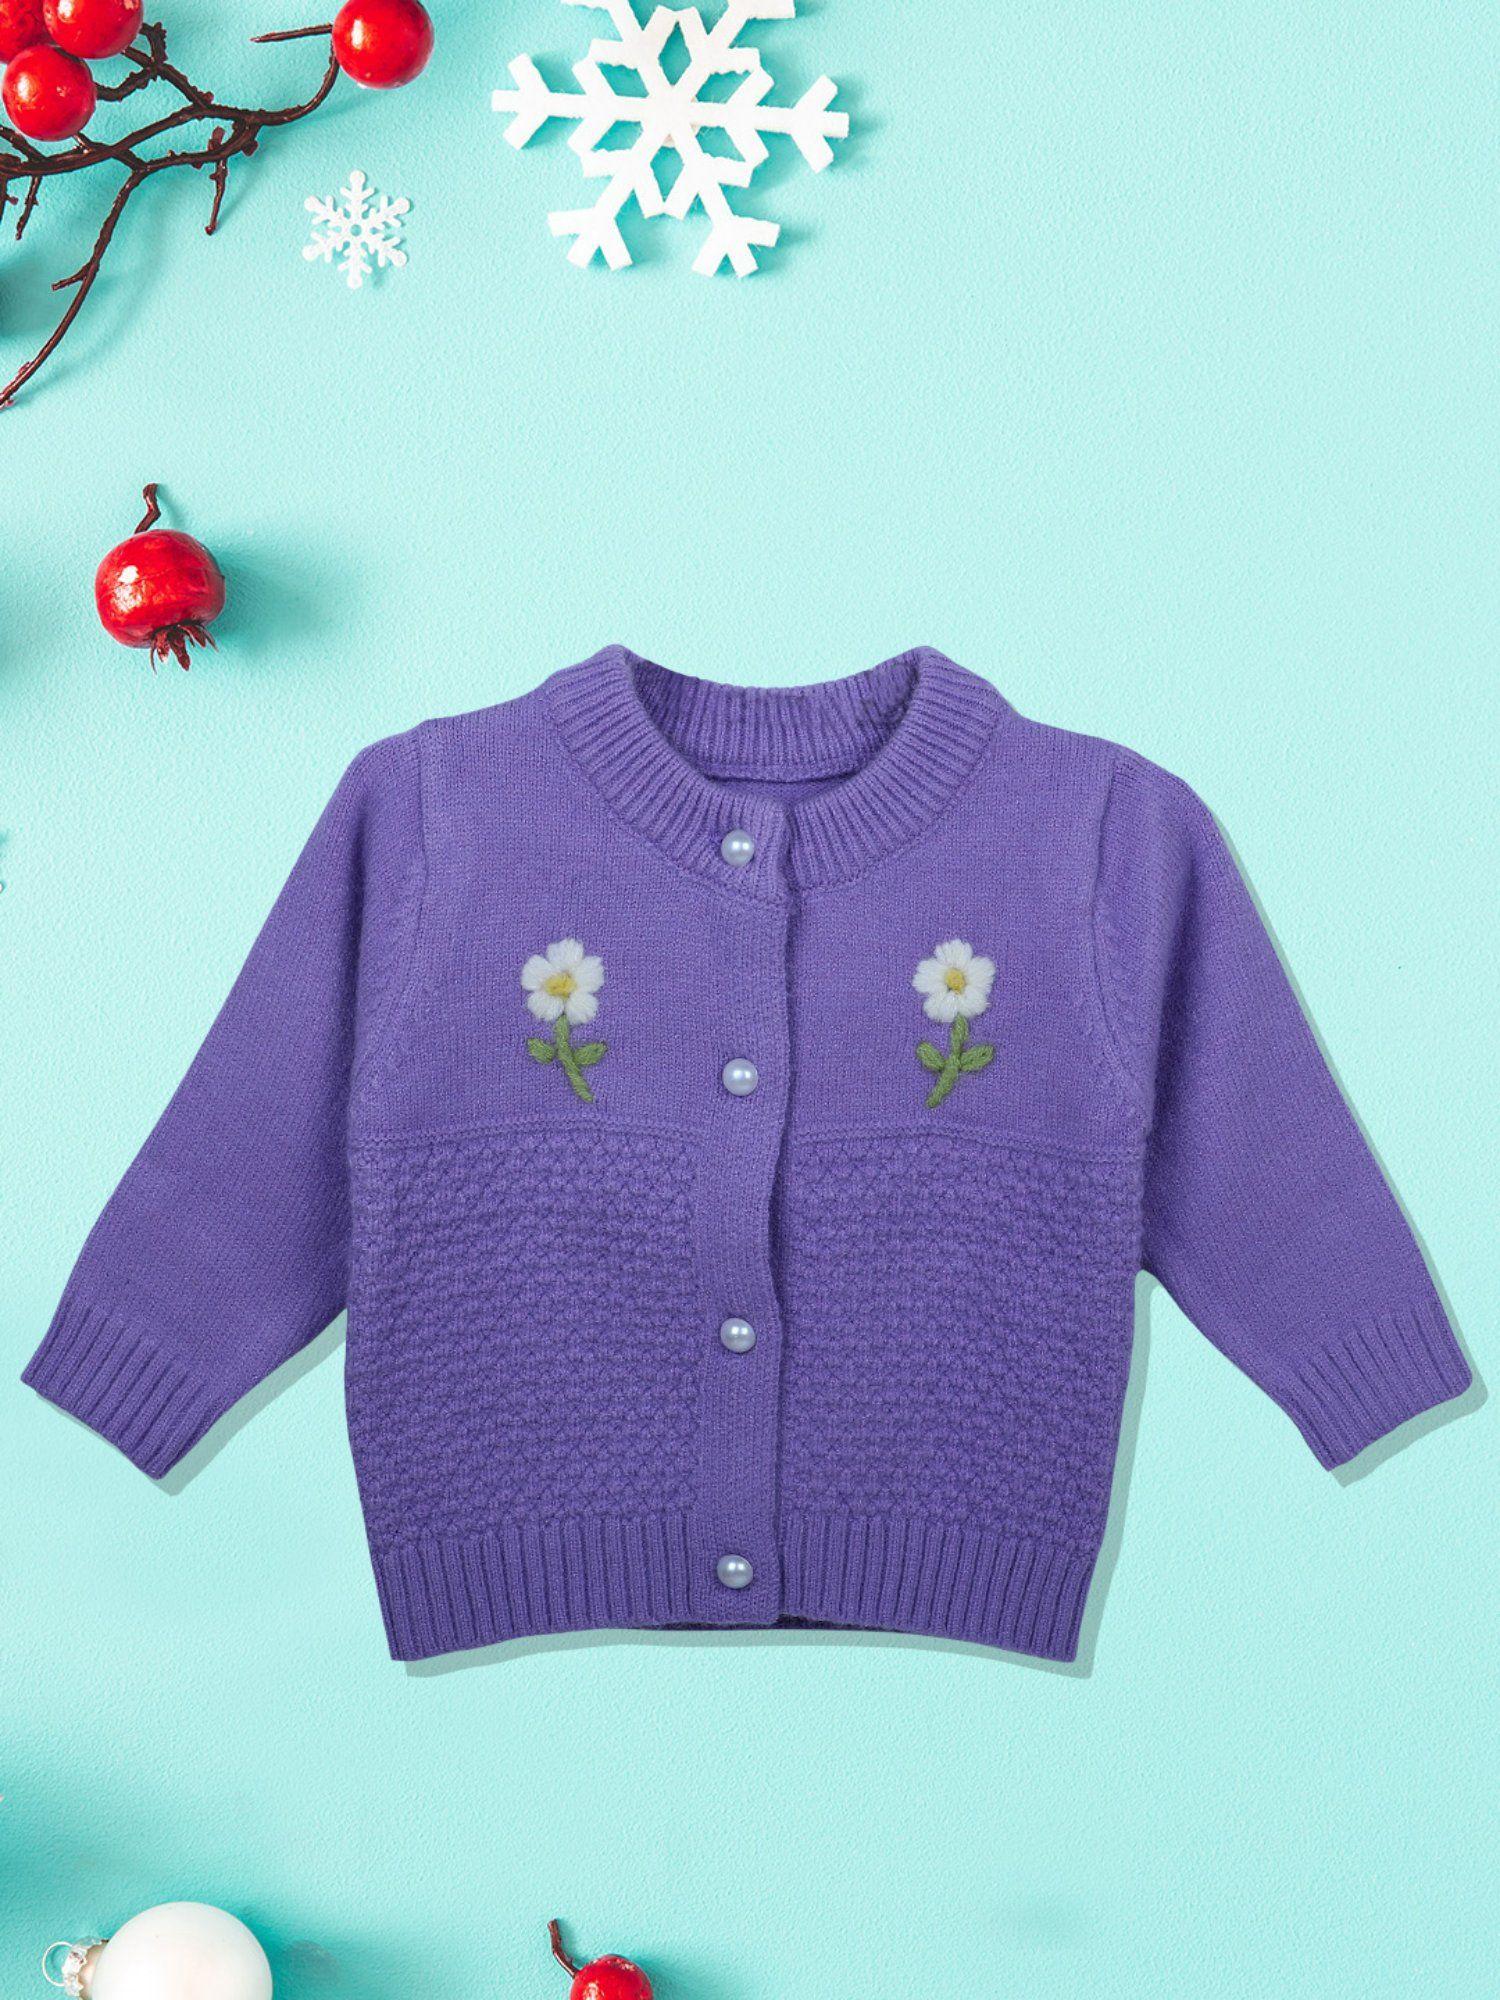 floral embroidery premium full sleeves knitted sweater purple